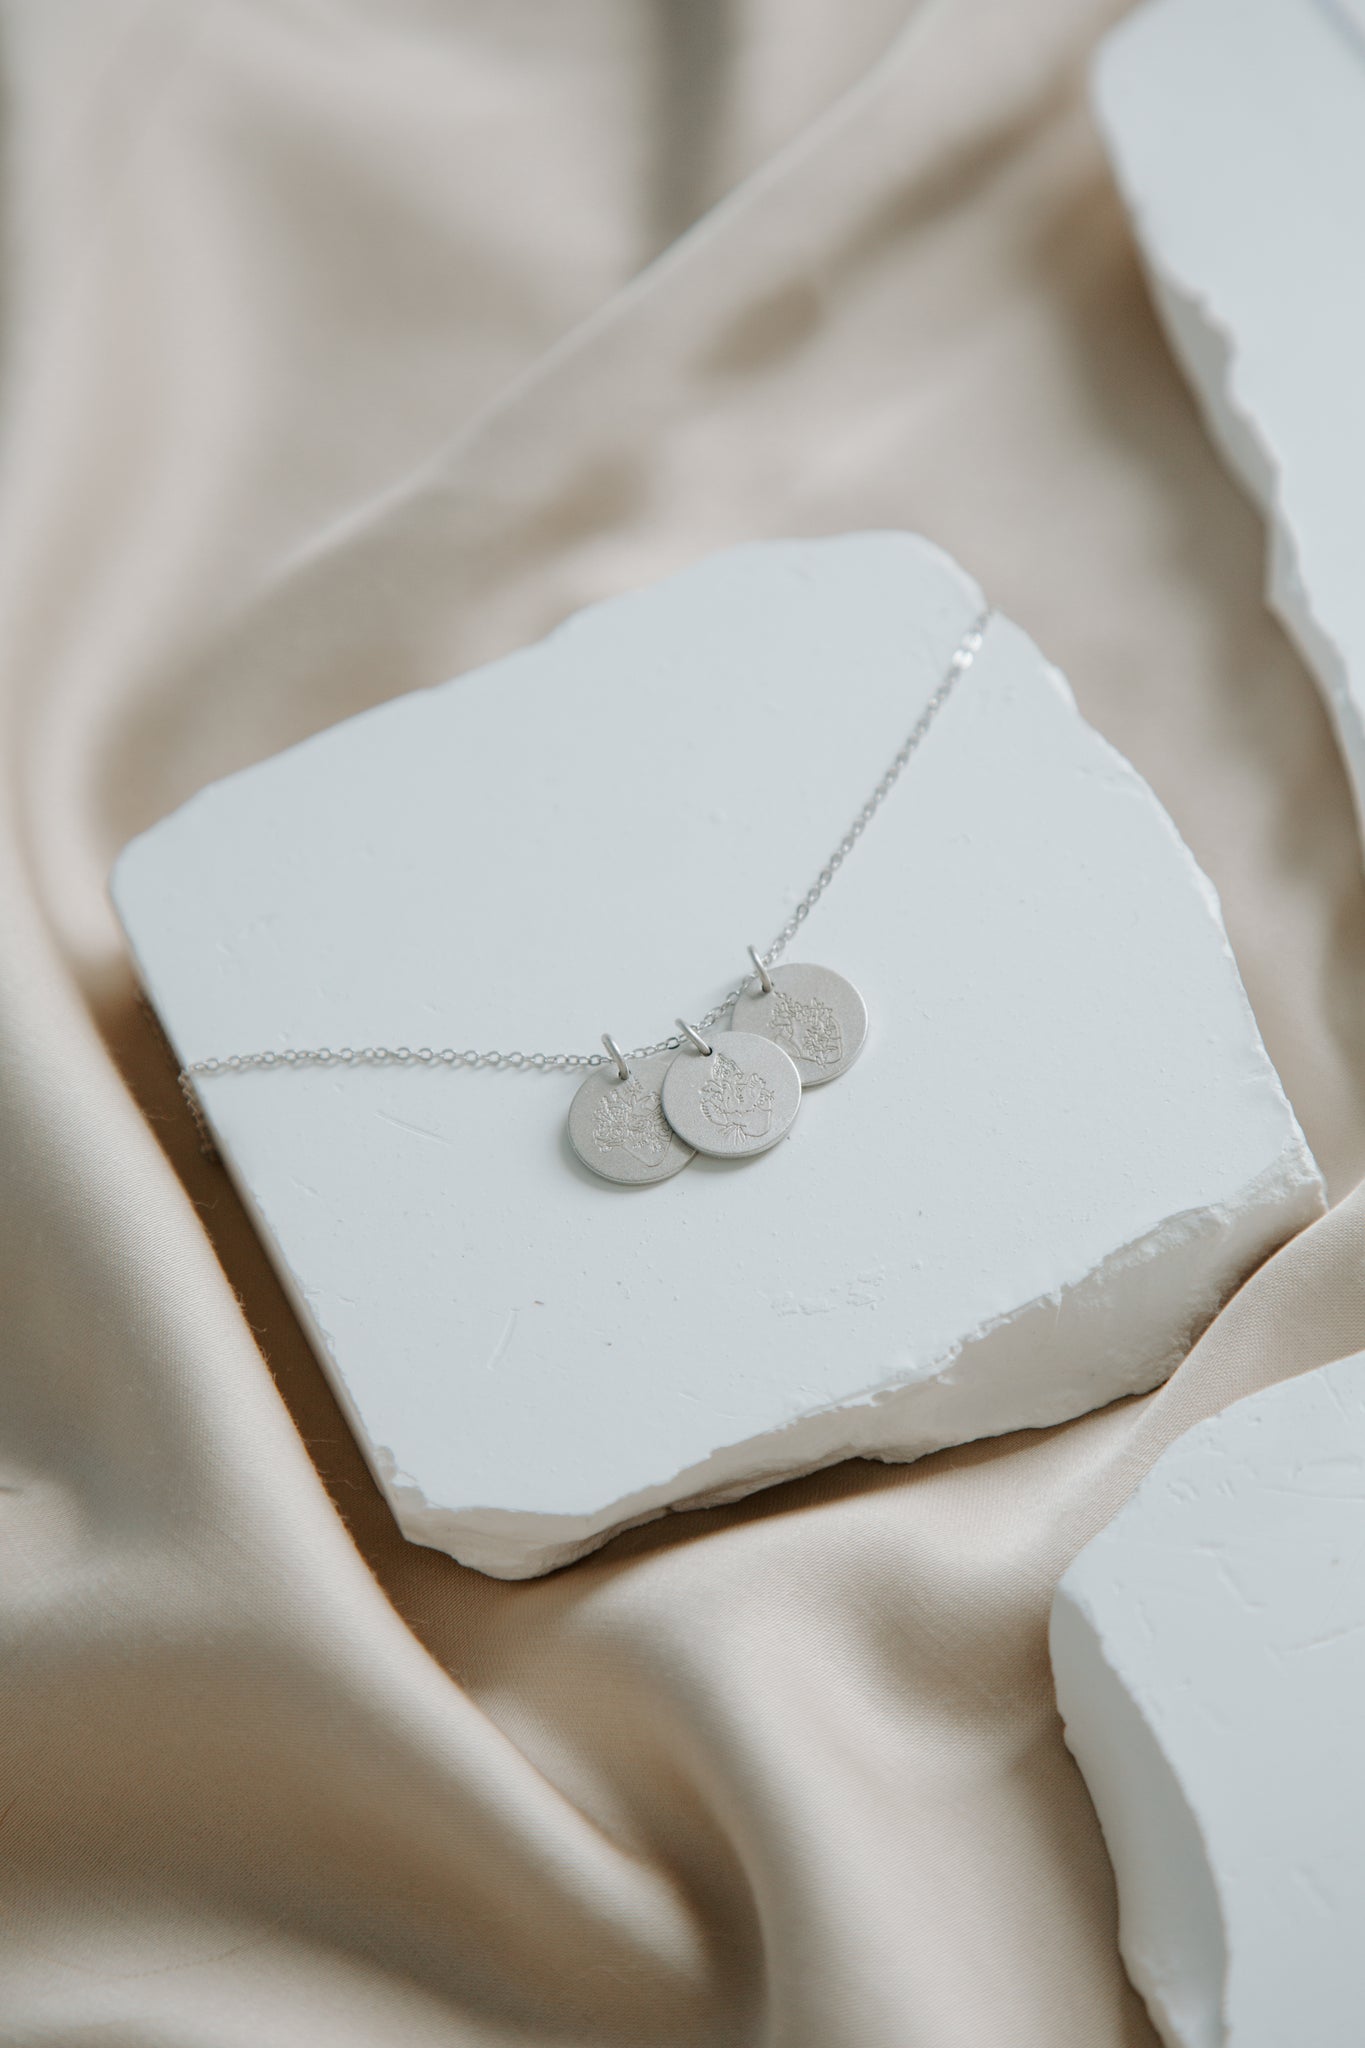 Heavenly Hearts Necklace